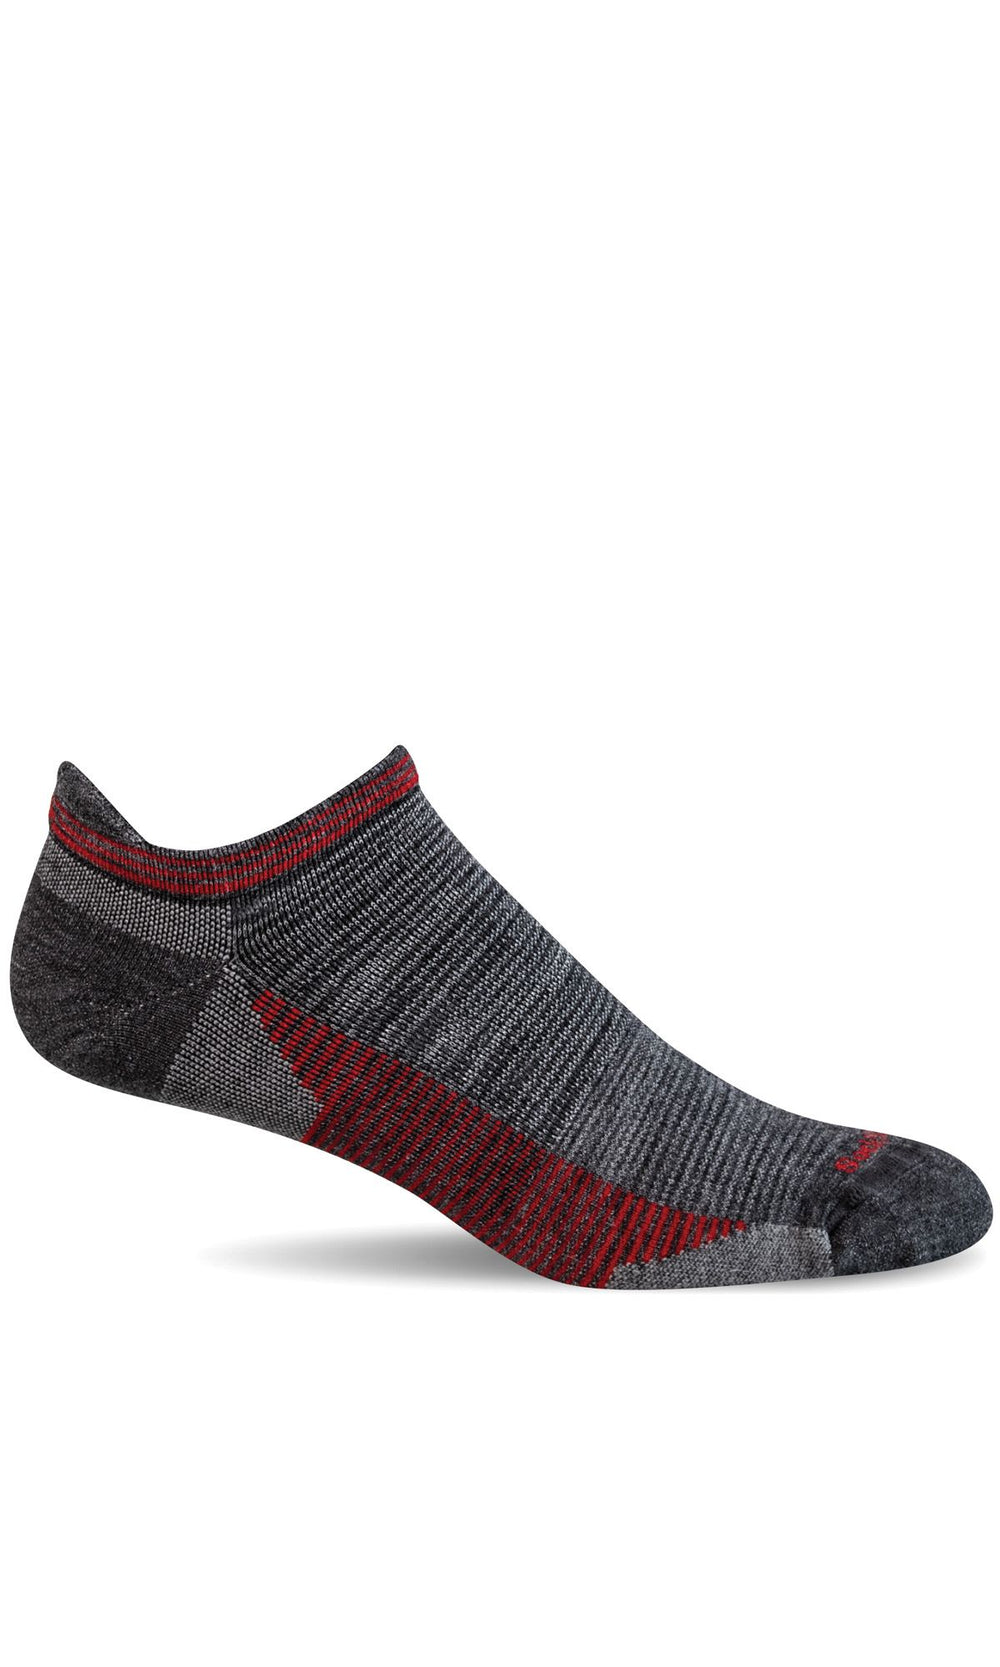 Sockwell Cadence Micro Moderate Compression Socks (Men's)